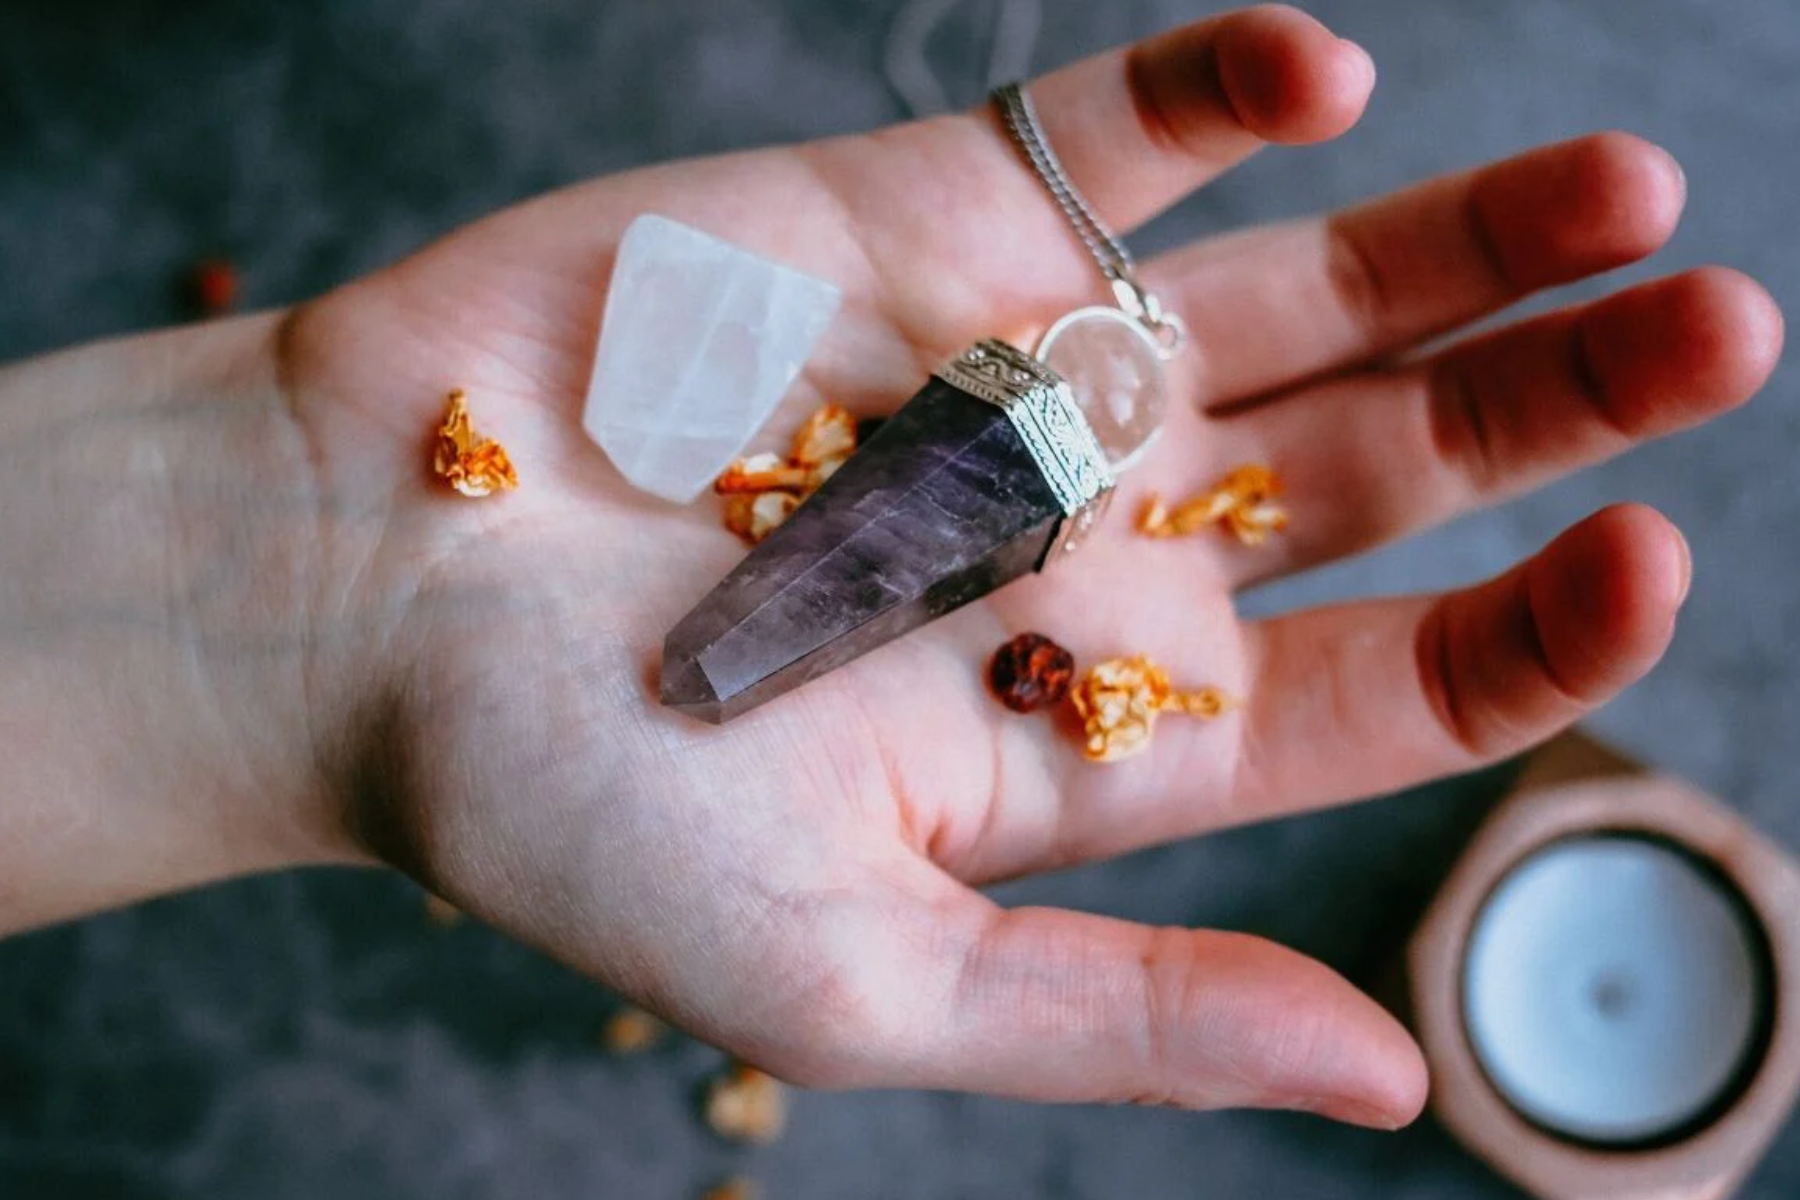 Amethyst and clear quartz in a man's palm